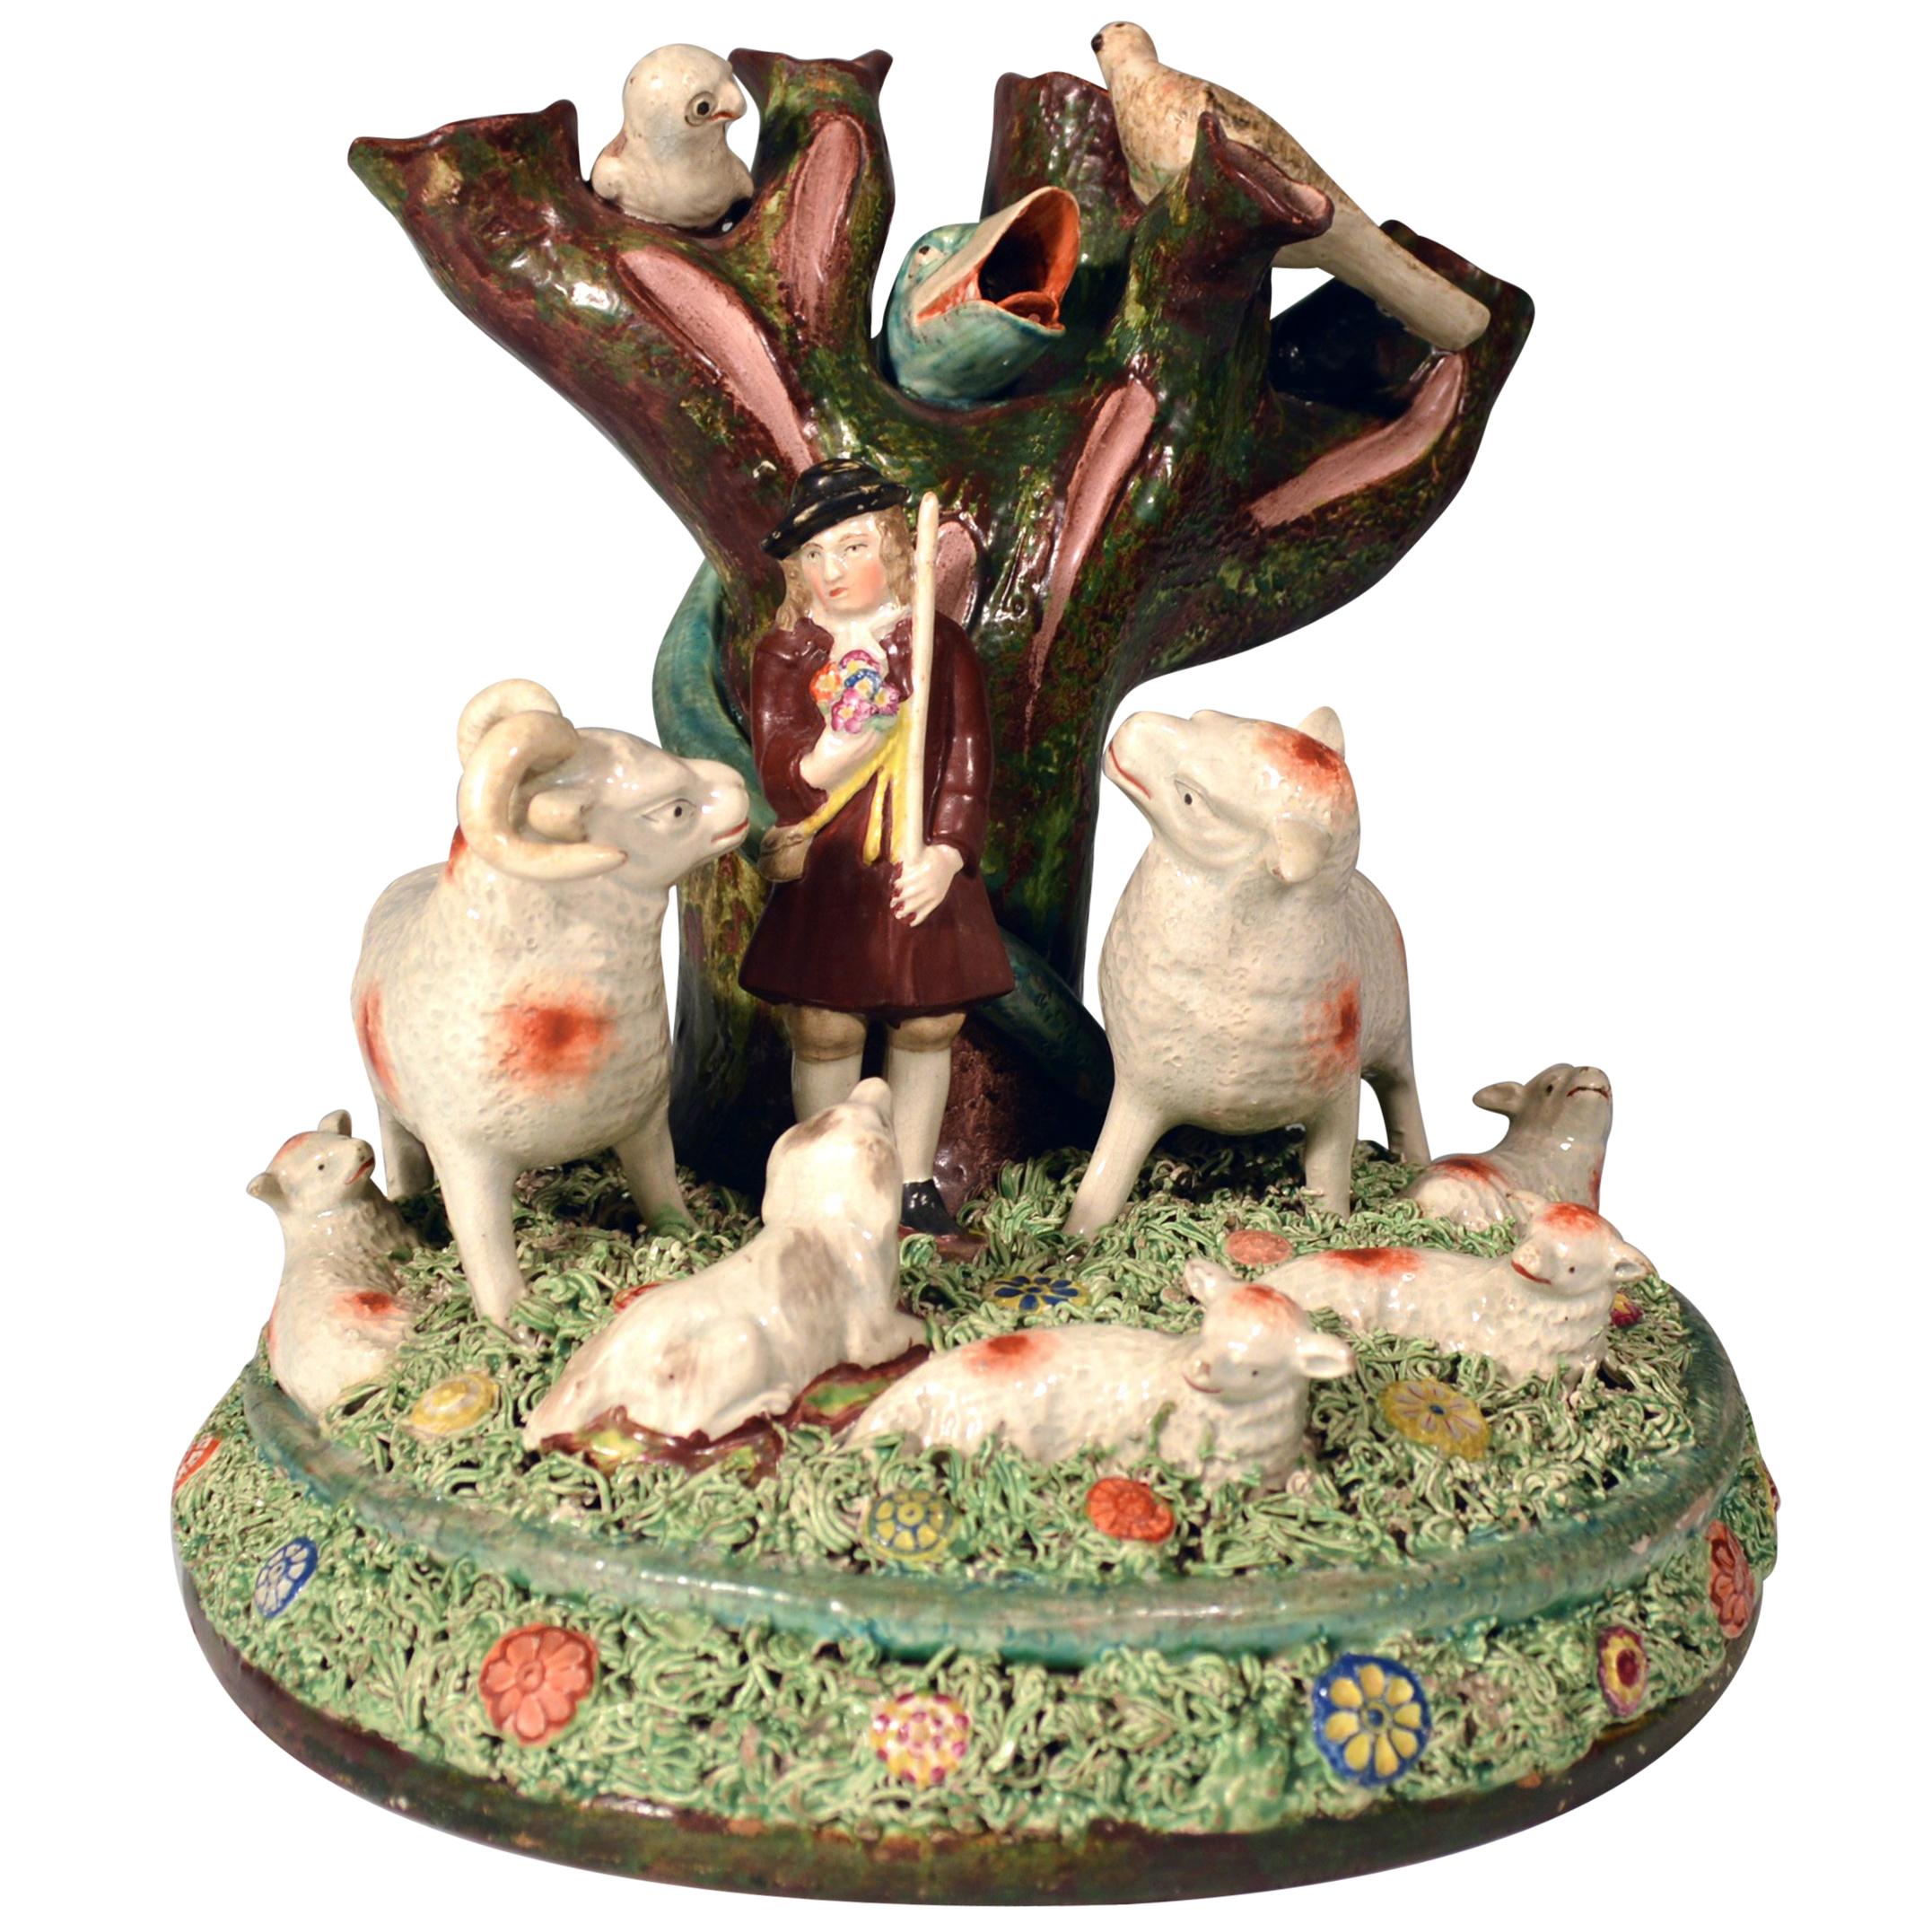 Staffordshire Pearlware Rare Pottery Group of Shepherd and Herd of Sheep, 1825